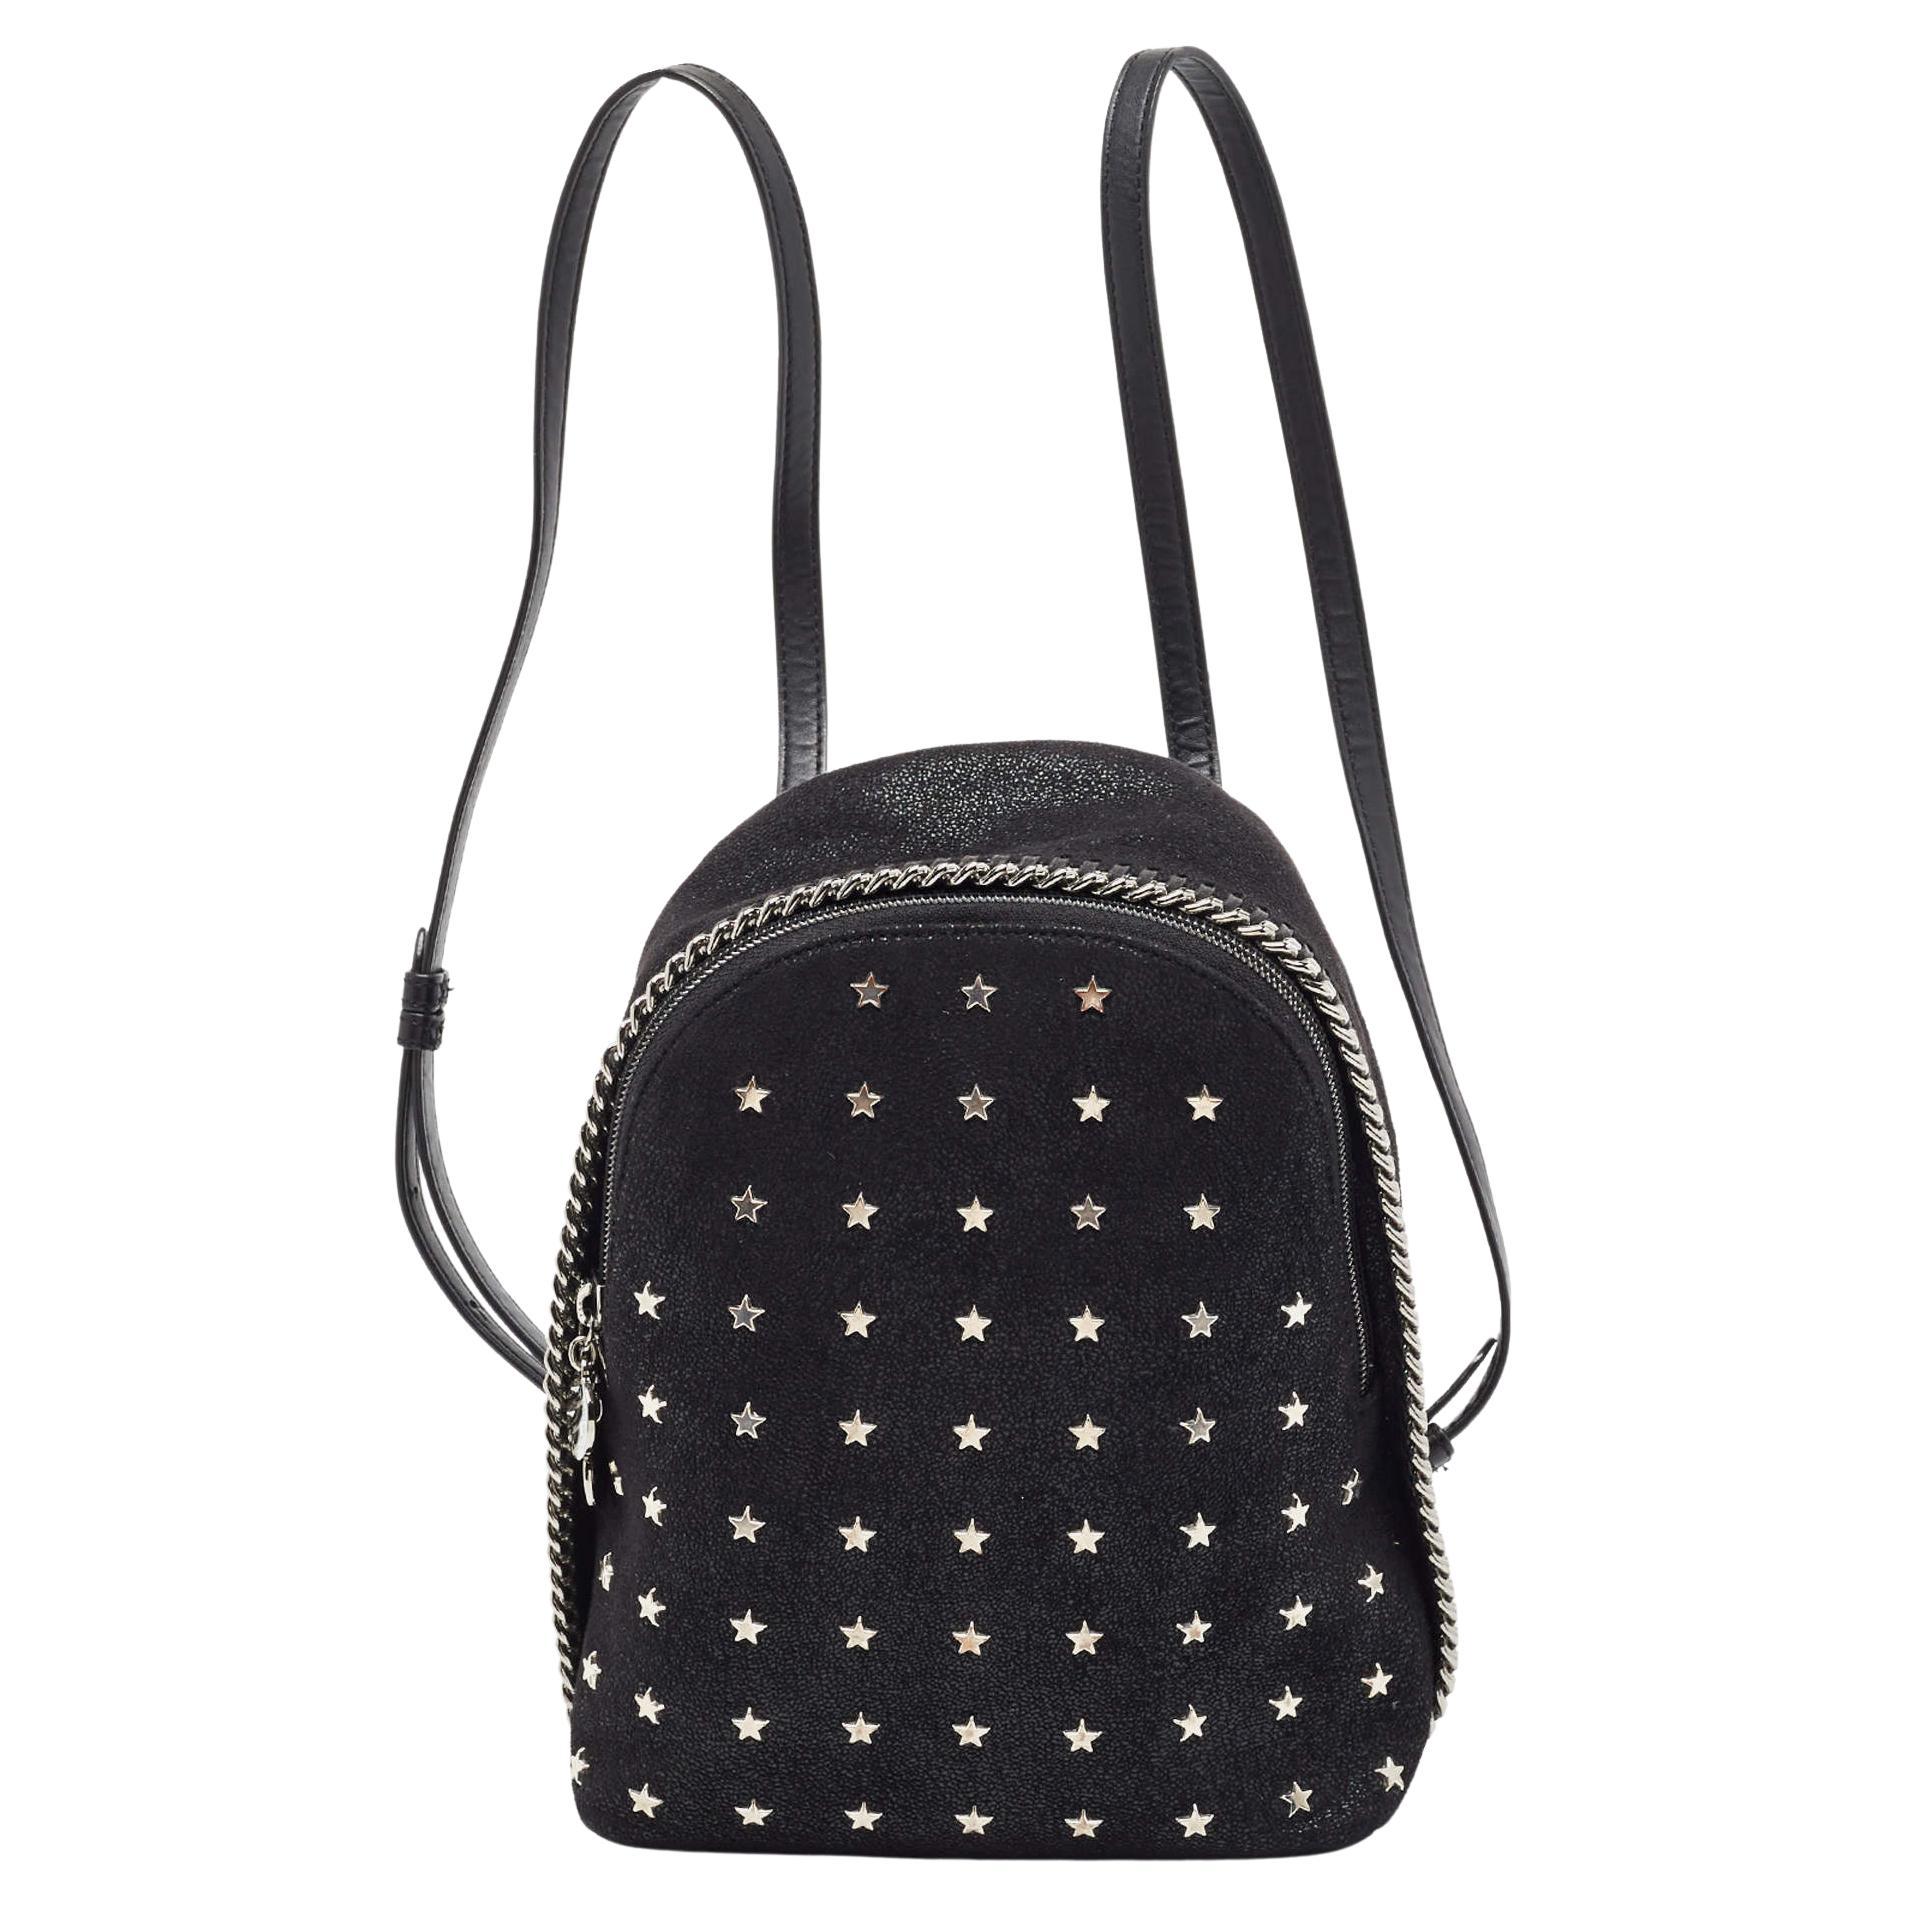 Stella McCartney Black Faux Leather Falabella Backpack For Sale